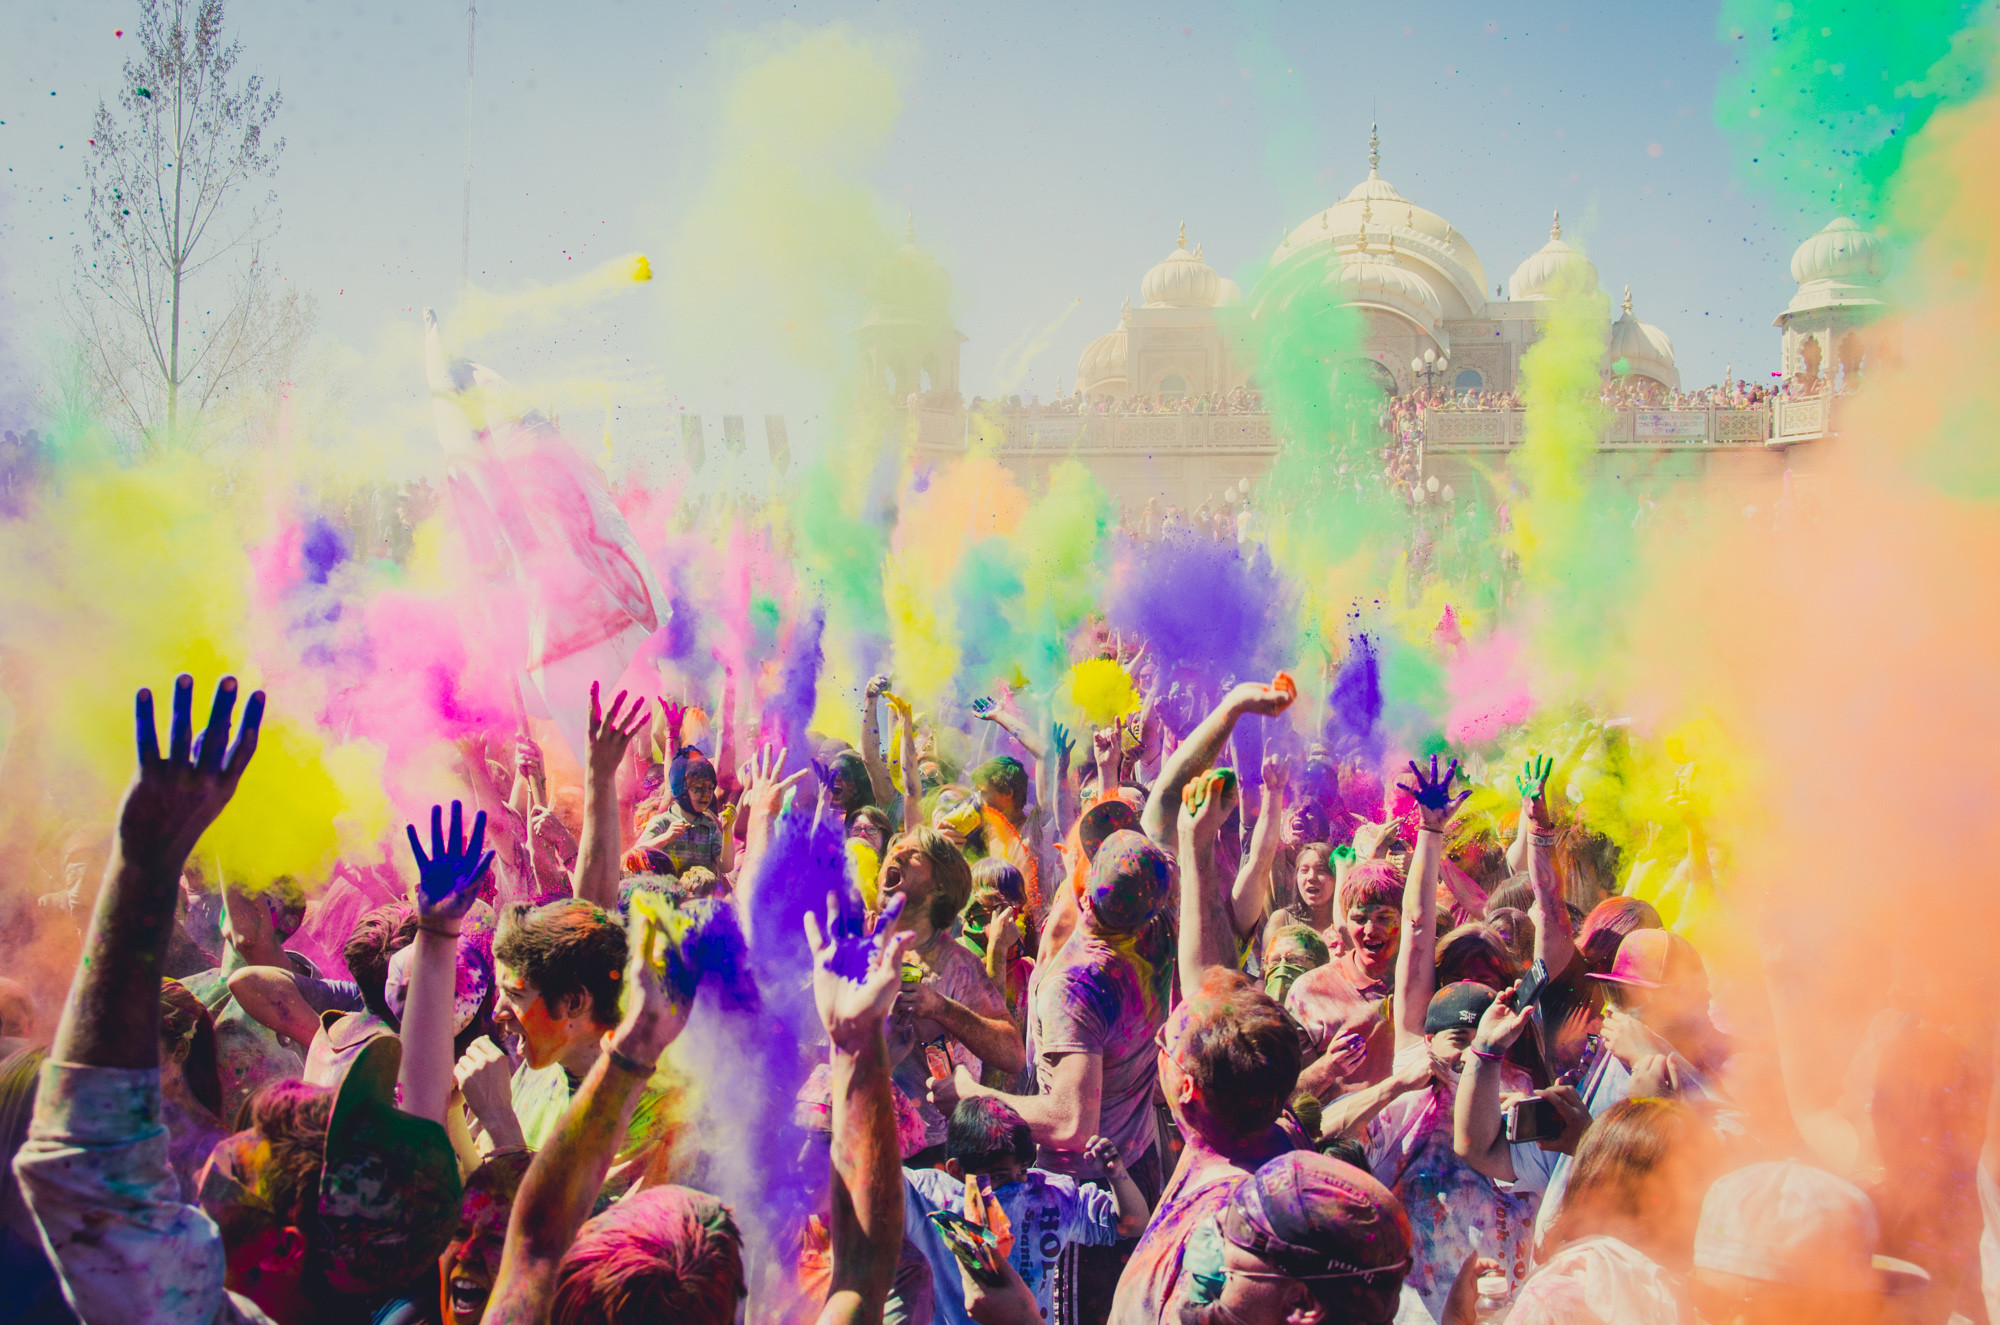 Holi Festival Wallpapers High Quality - Our Favorite Festival Painting - HD Wallpaper 